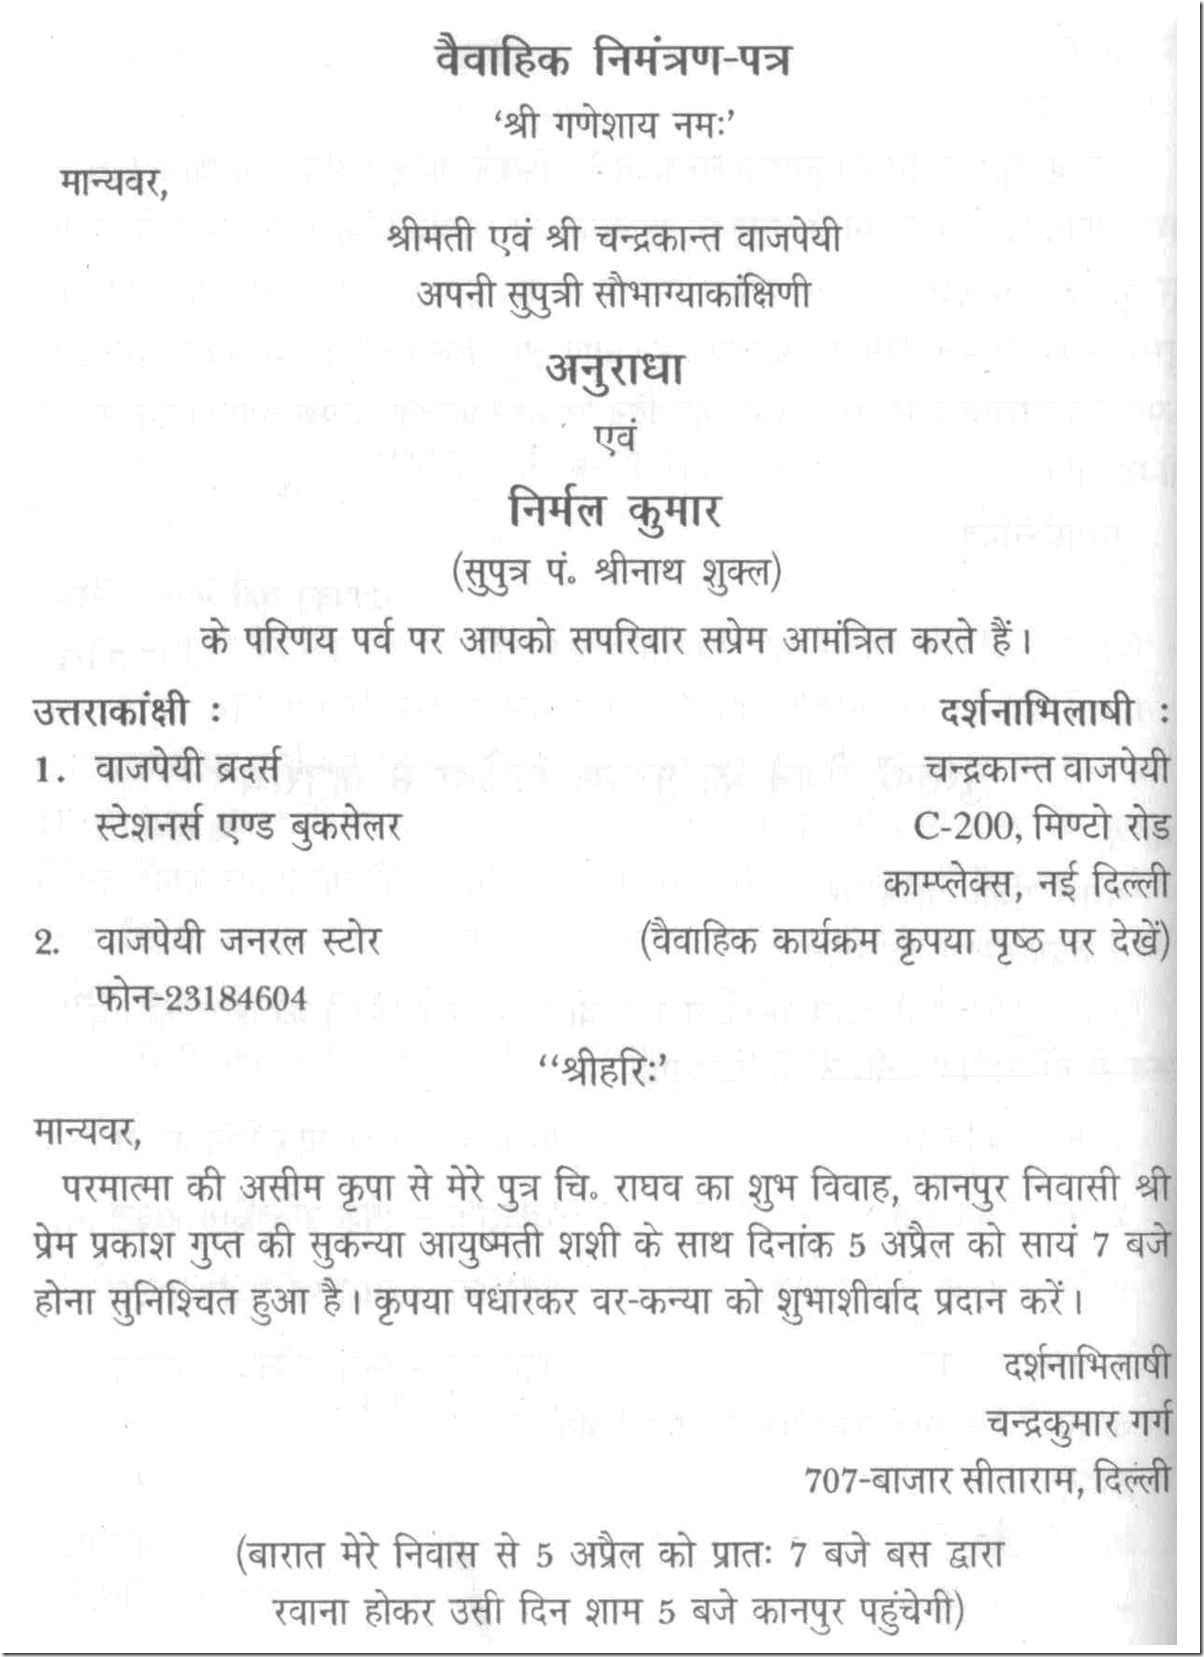 Invitation Letter To Attend The Marriage Ceremony In Hindi